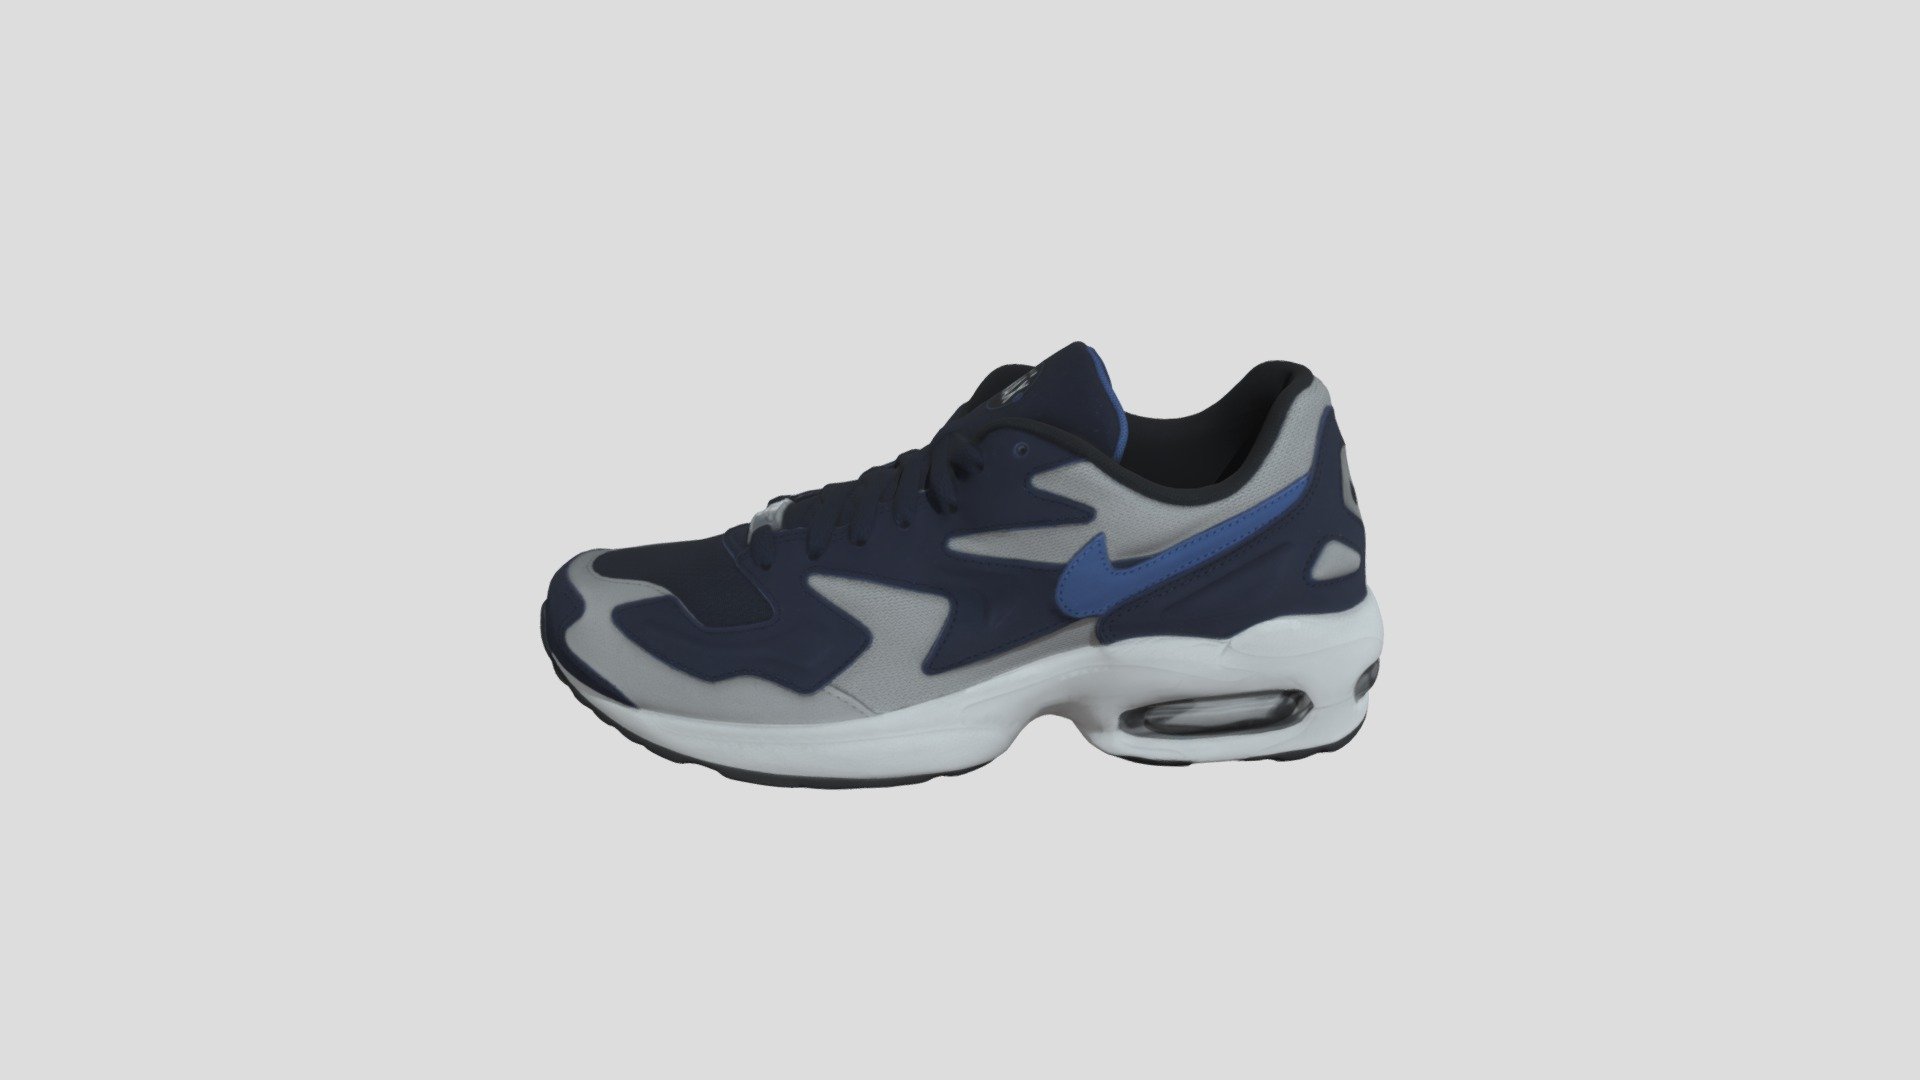 This model was created firstly by 3D scanning on retail version, and then being detail-improved manually, thus a 1:1 repulica of the original
PBR ready
Low-poly
4K texture
Welcome to check out other models we have to offer. And we do accept custom orders as well :) - Nike Air Max 2 蓝灰_AO1741-400 - Buy Royalty Free 3D model by TRARGUS 3d model